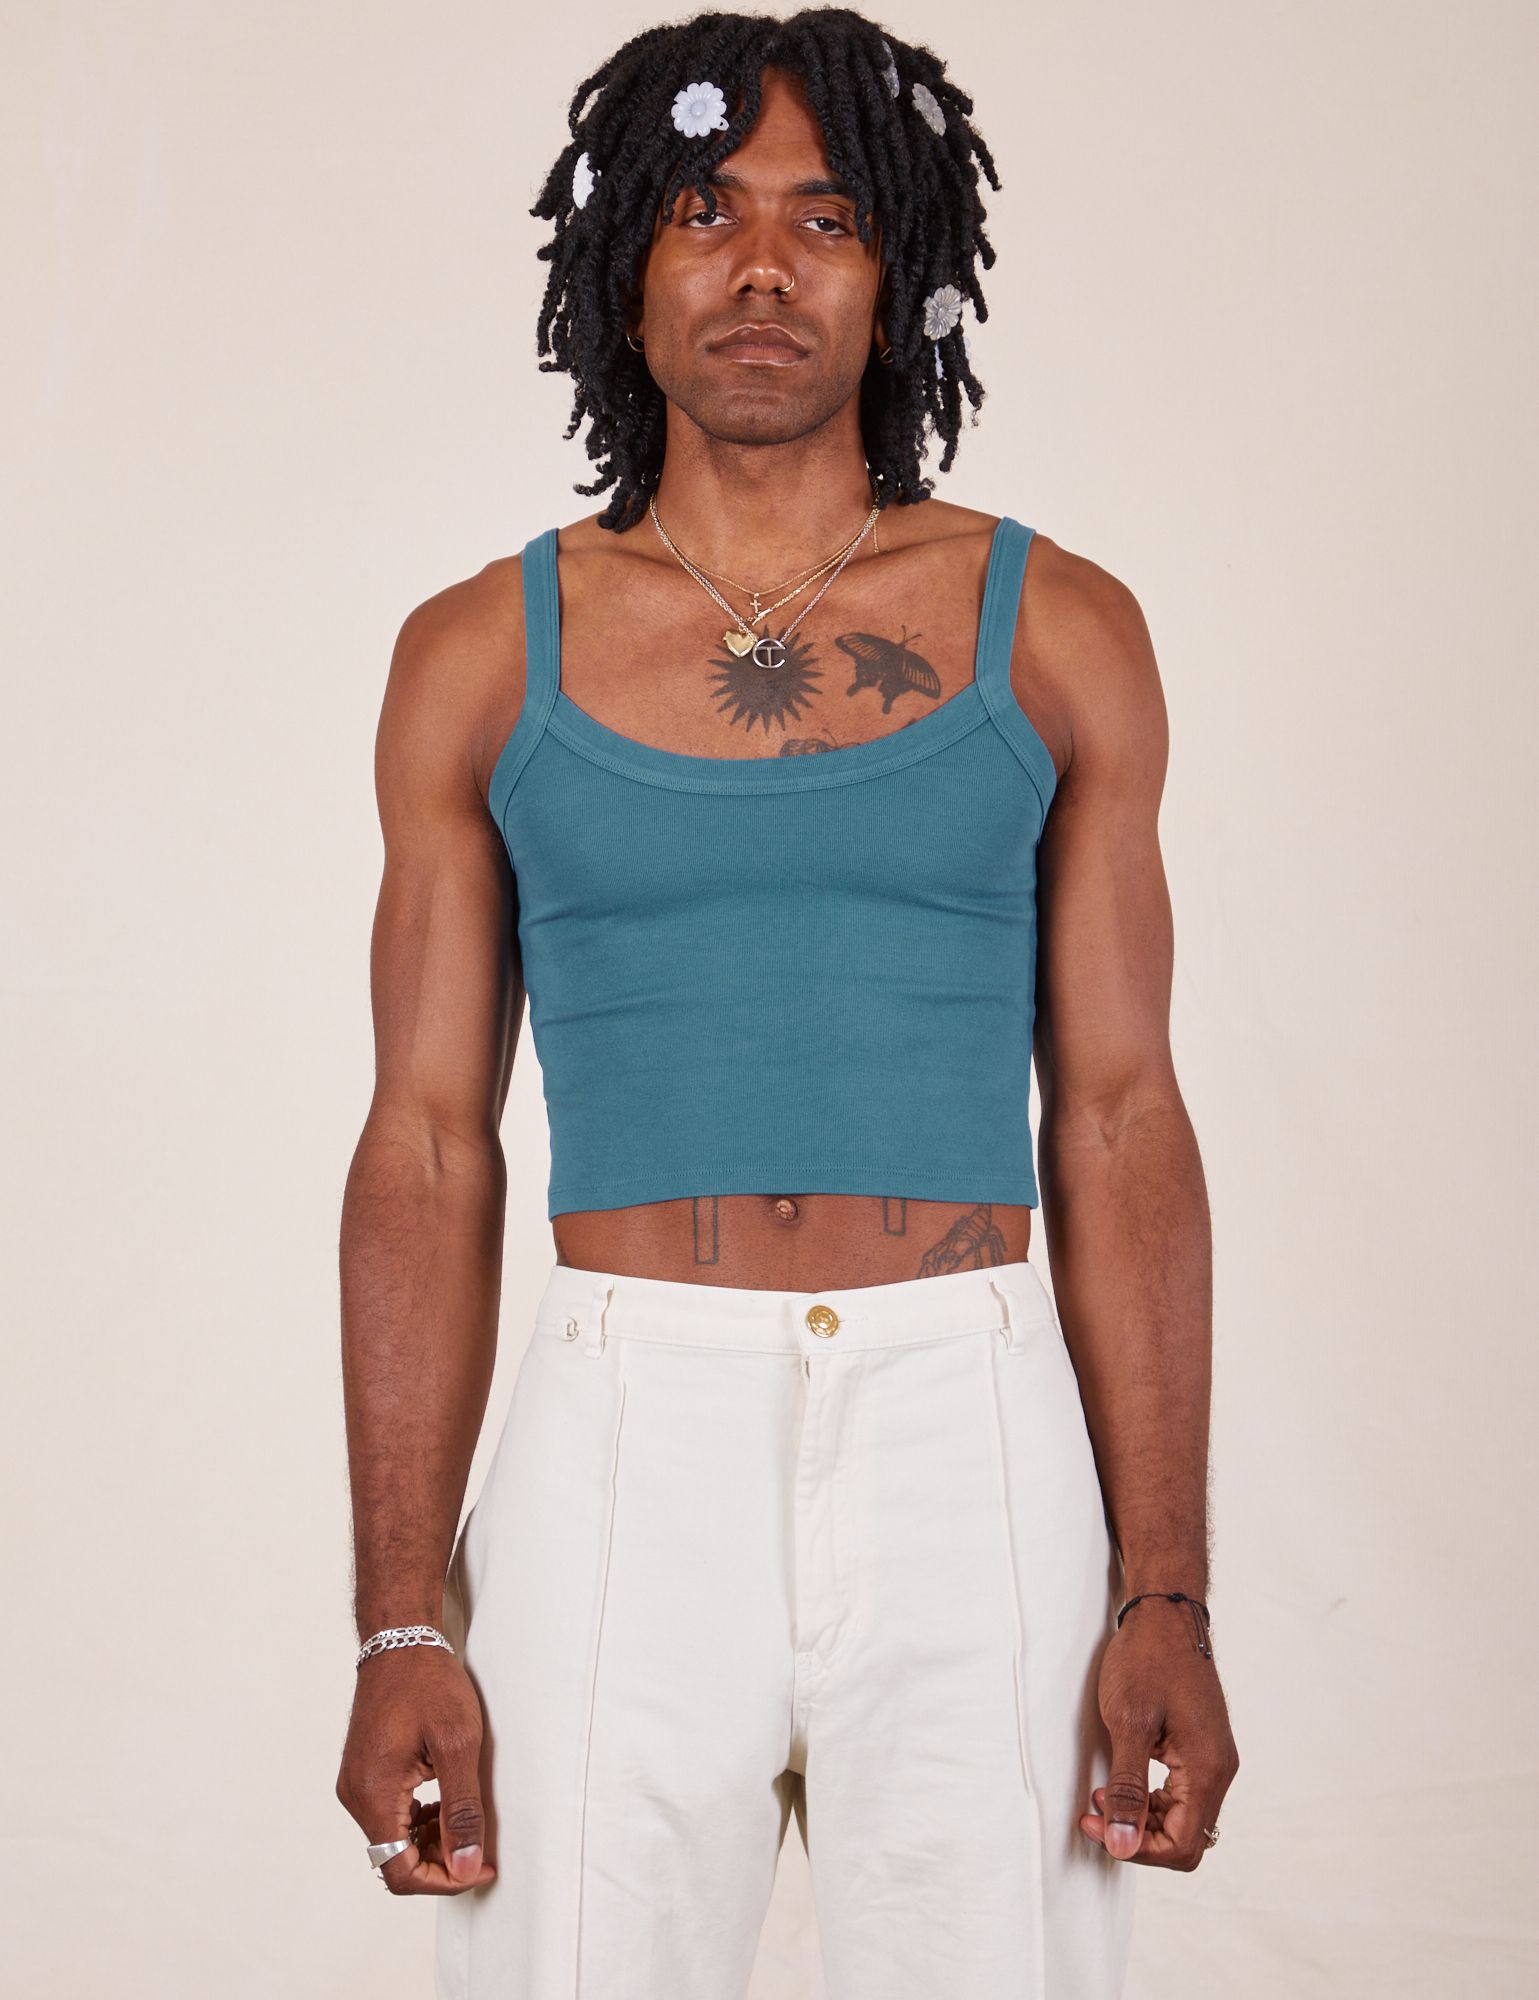 Jerrod is 6&#39;3&quot; and wearing S Cropped Cami in Marine Blue paired with vintage tee off-white Western Pants